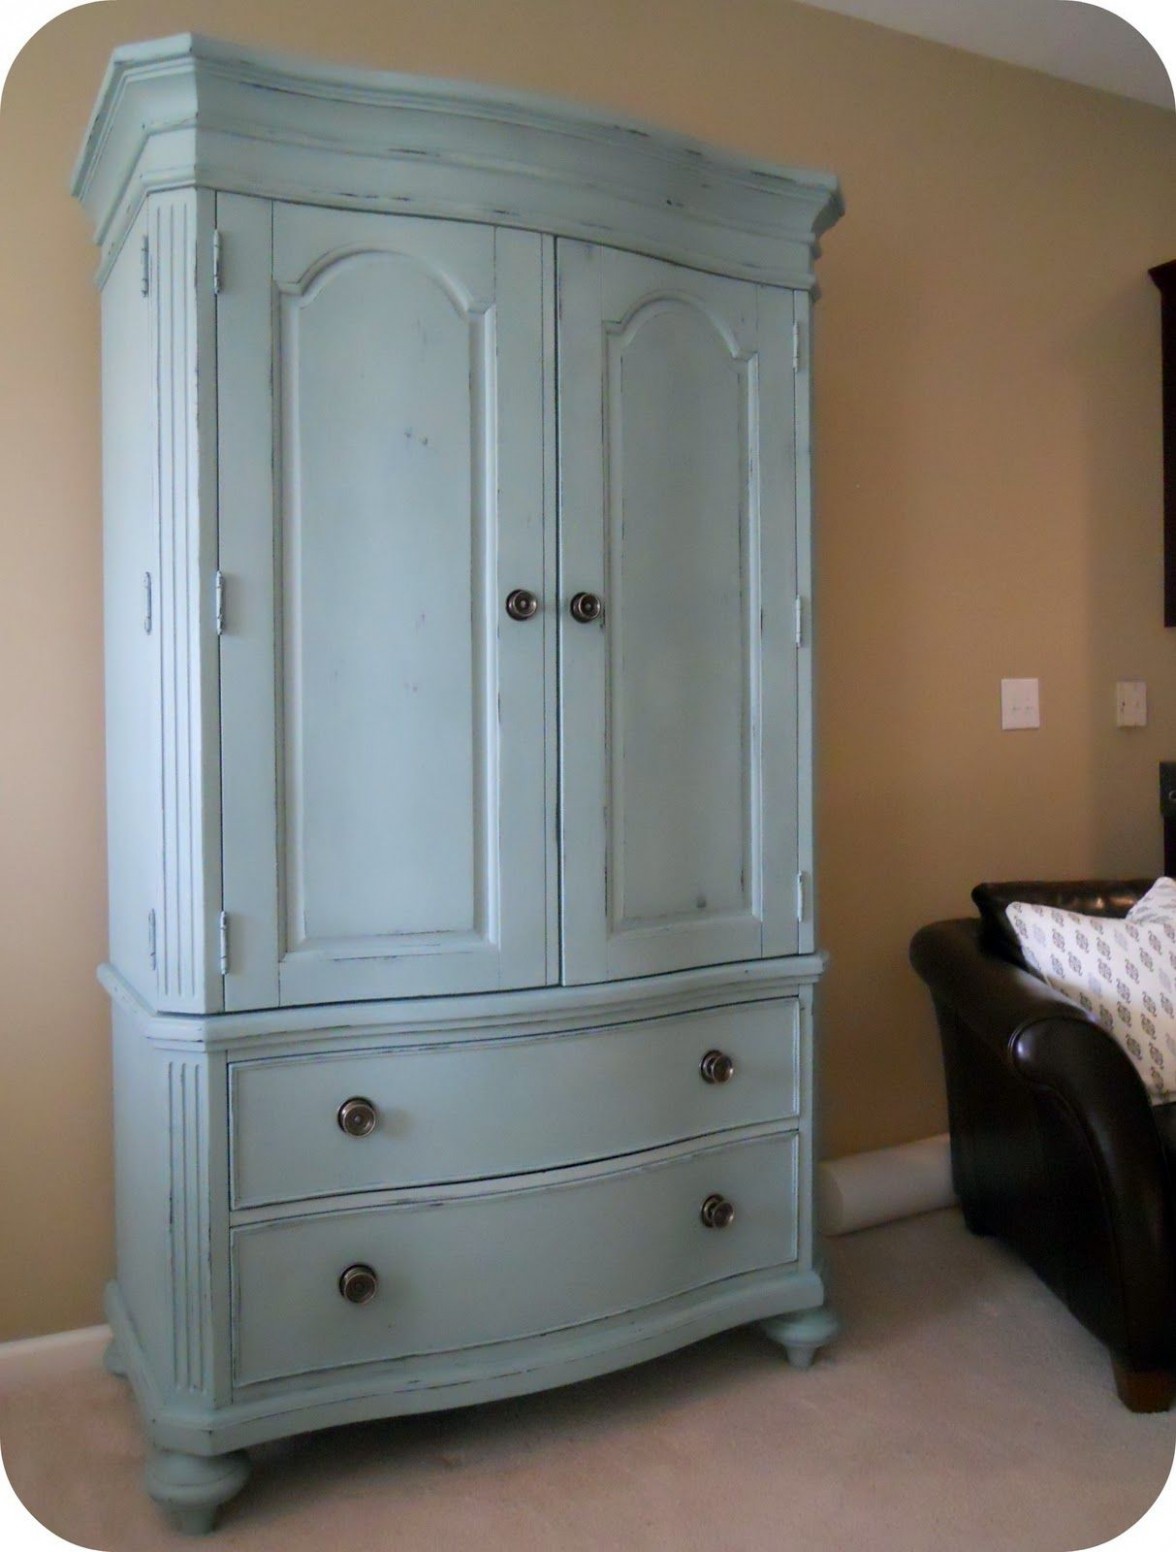 A Black Armoire Re Do With Chalk Paint | Armoire, Redo Furniture ..